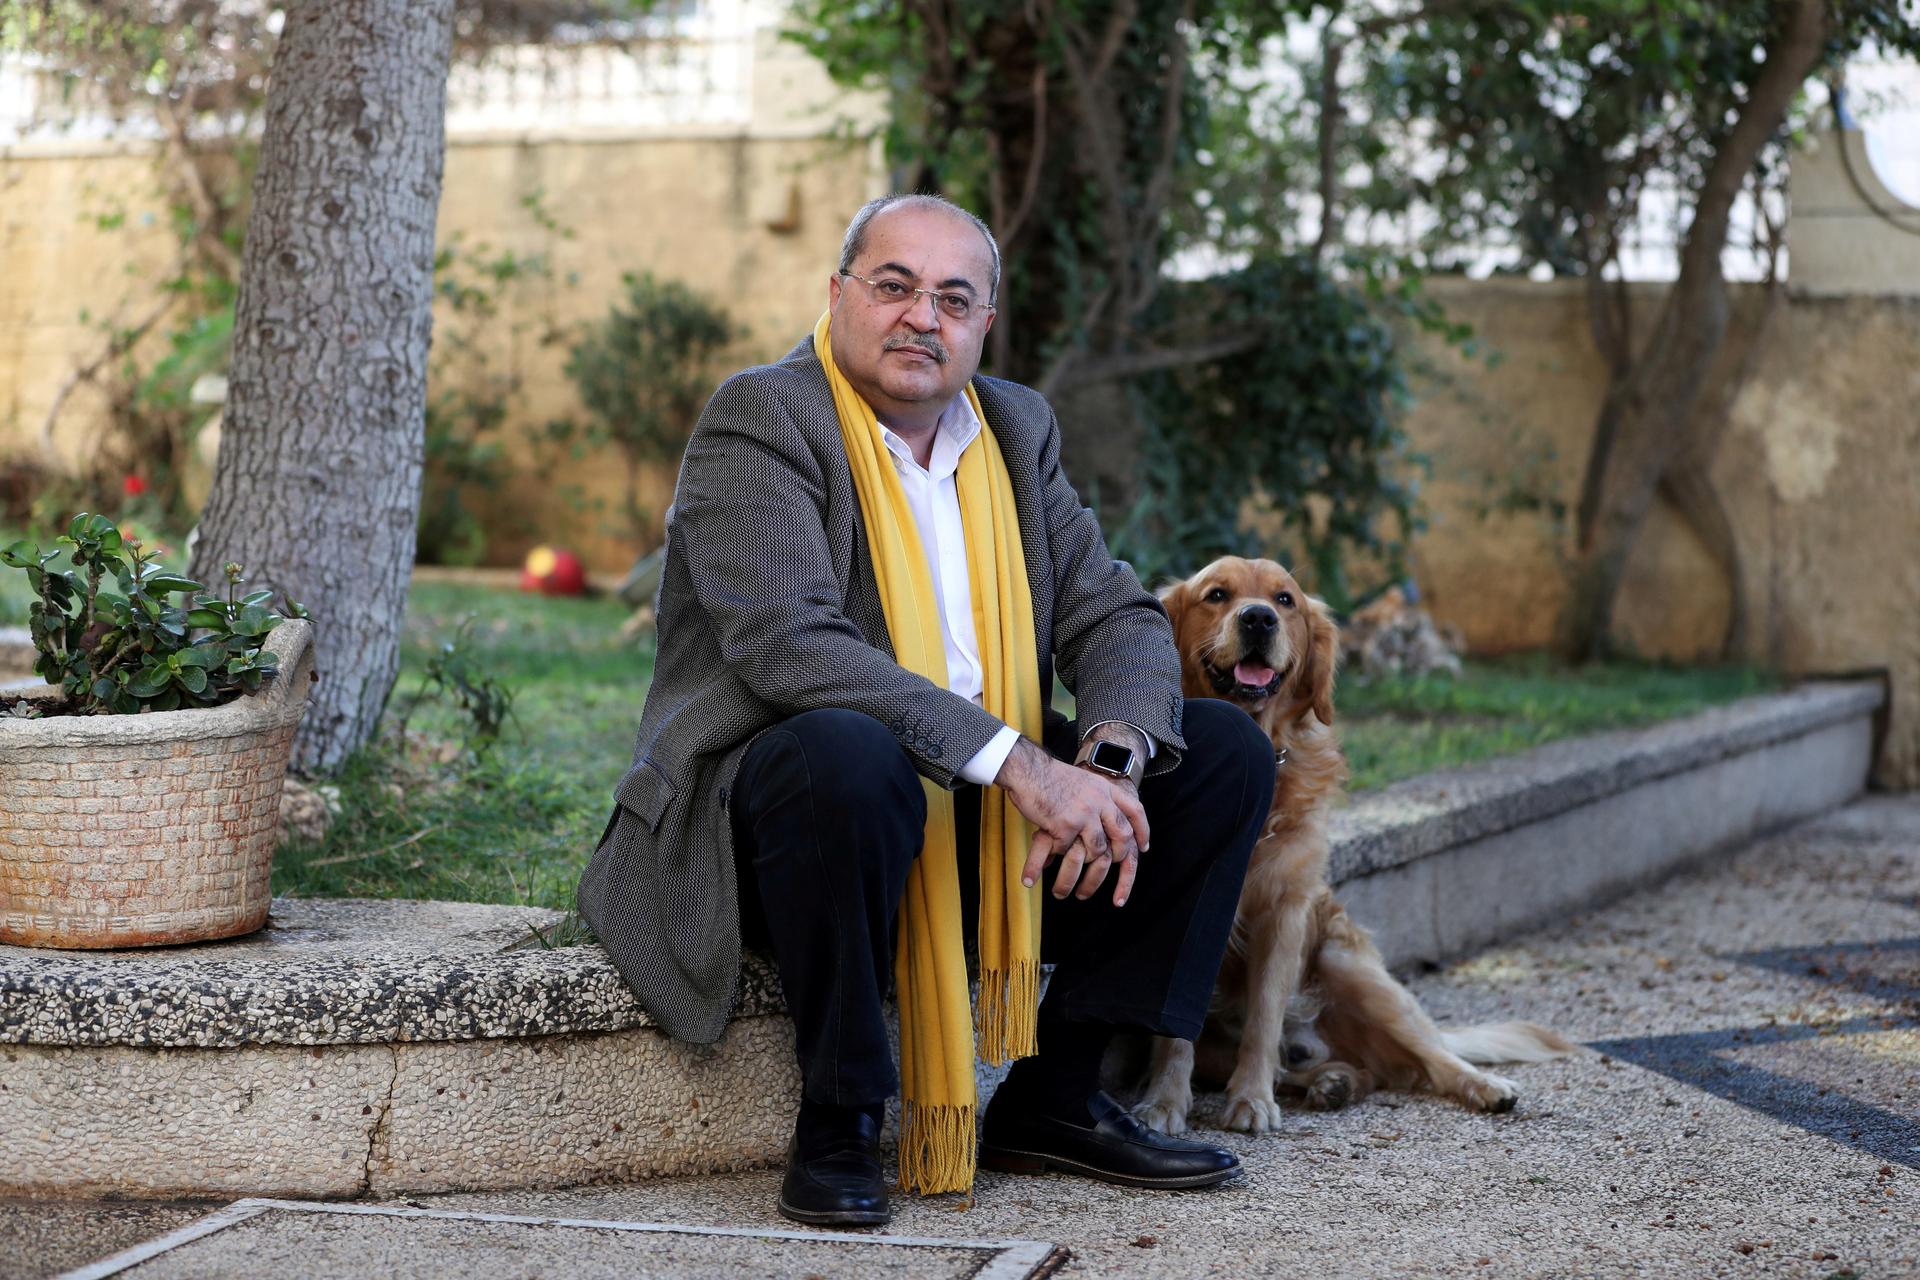 Arab politician wears yellow scarf in a suit with his dog and sits on a curb.